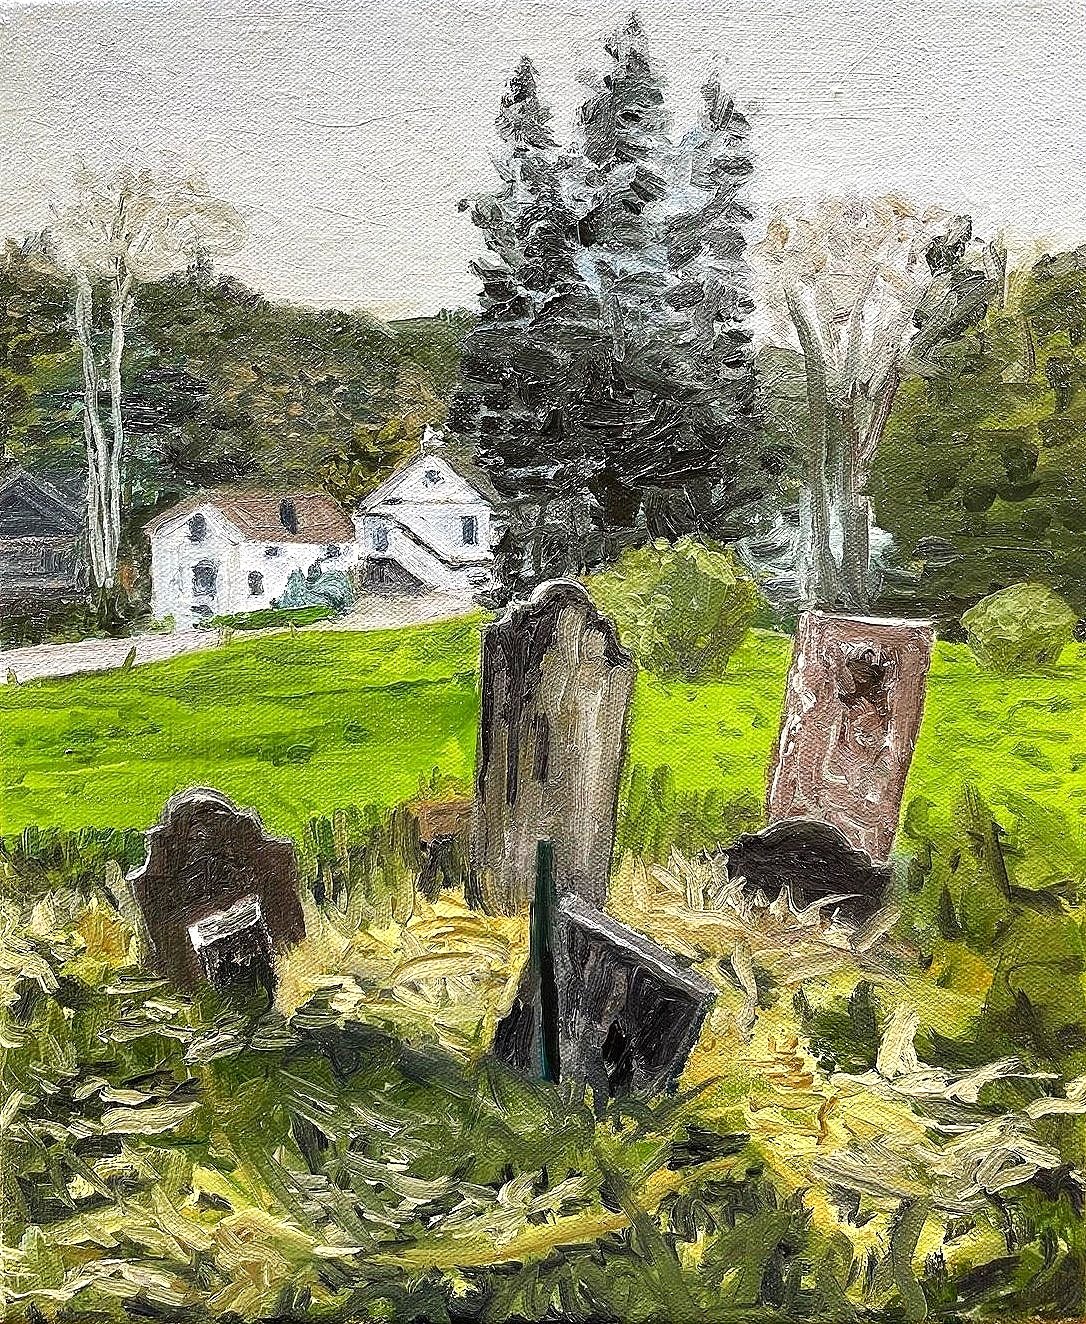   Graveyard in July,  Oil on Canvas, 12” x 10”, 2022 